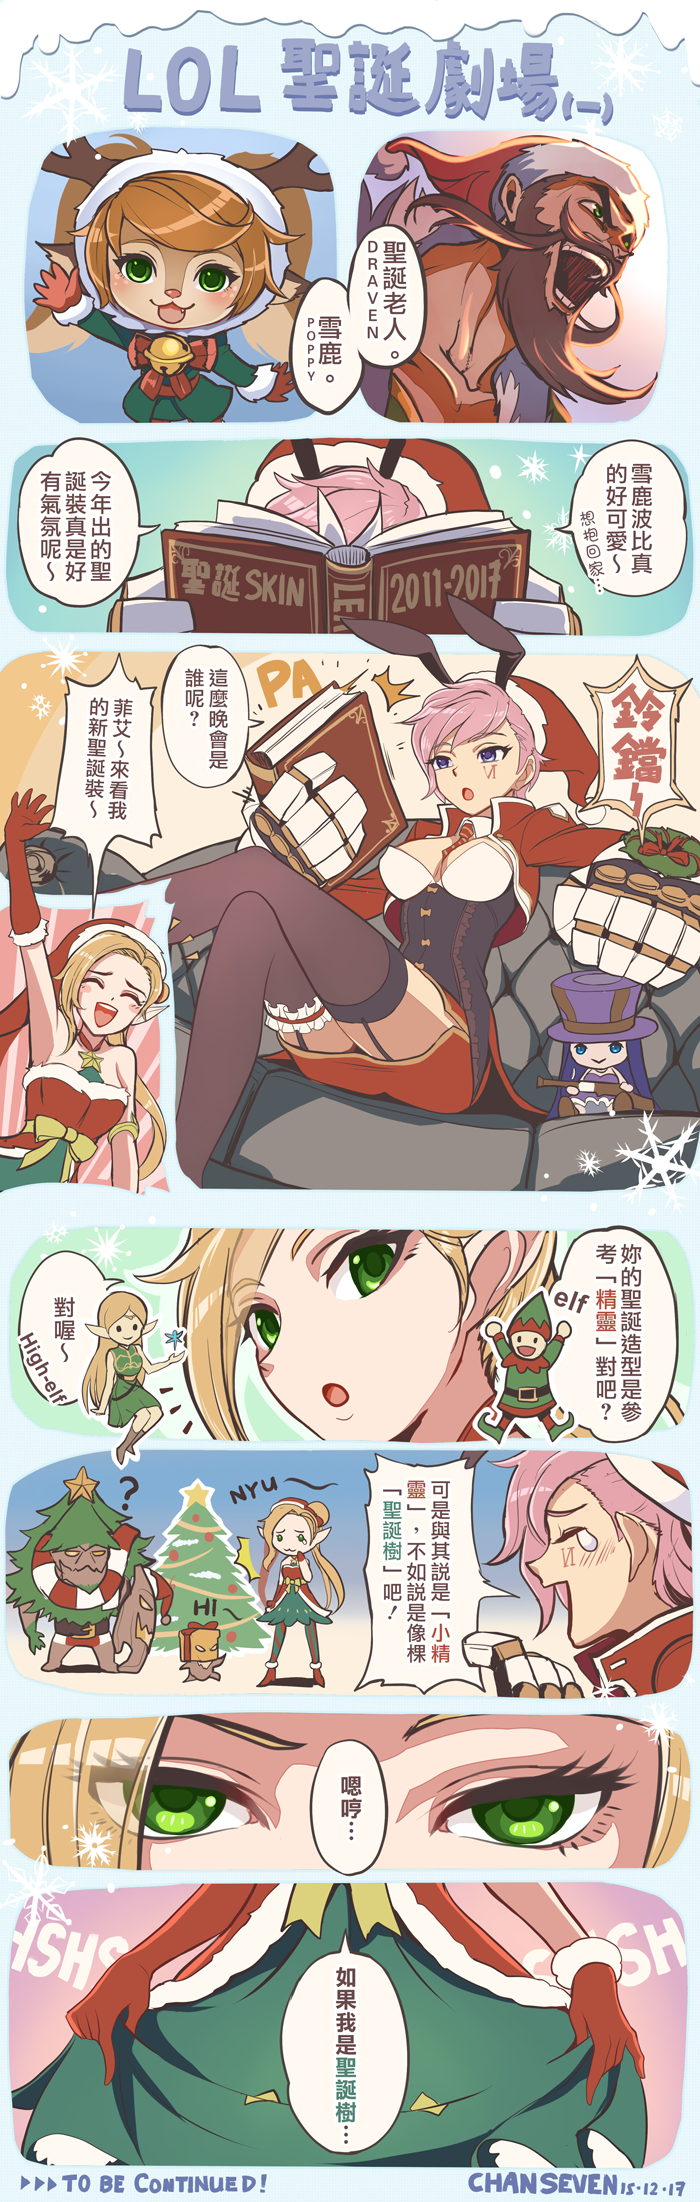 1boy 5girls alternate_hair_color bell blonde_hair boots bow bows caitlyn_(league_of_legends) chan_qi_(fireworkhouse) character_doll choker christmas christmas_tree comic elf fang fluffy_ears gloves horns jinx_(league_of_legends) league_of_legends long_hair multiple_girls pointy_ears poppy_(league_of_legends) ribbon santa_hat skirt thighhighs translation_request twintails vi_(league_of_legends) yordle